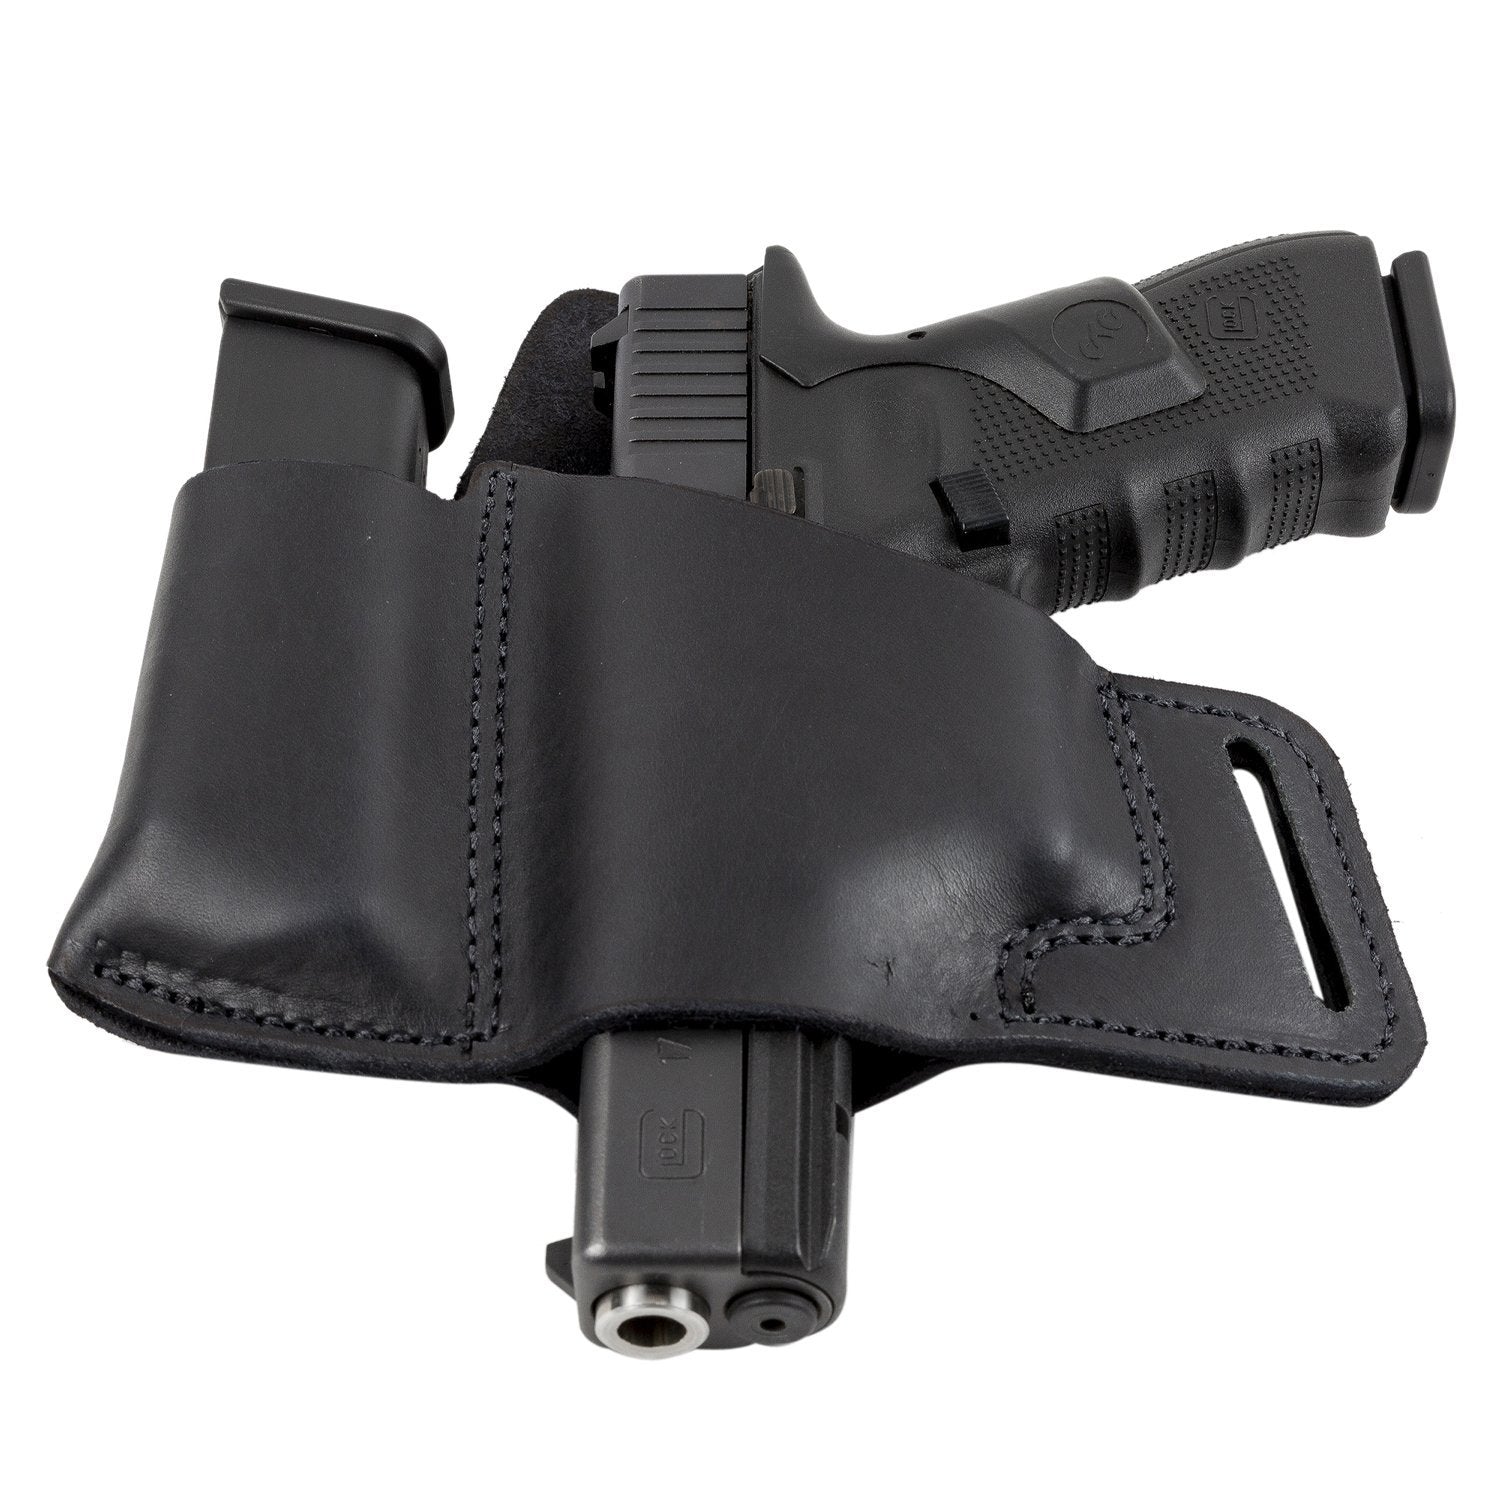 The Ultimate Slot OWB Leather Gun Holster Relentless, 48% OFF